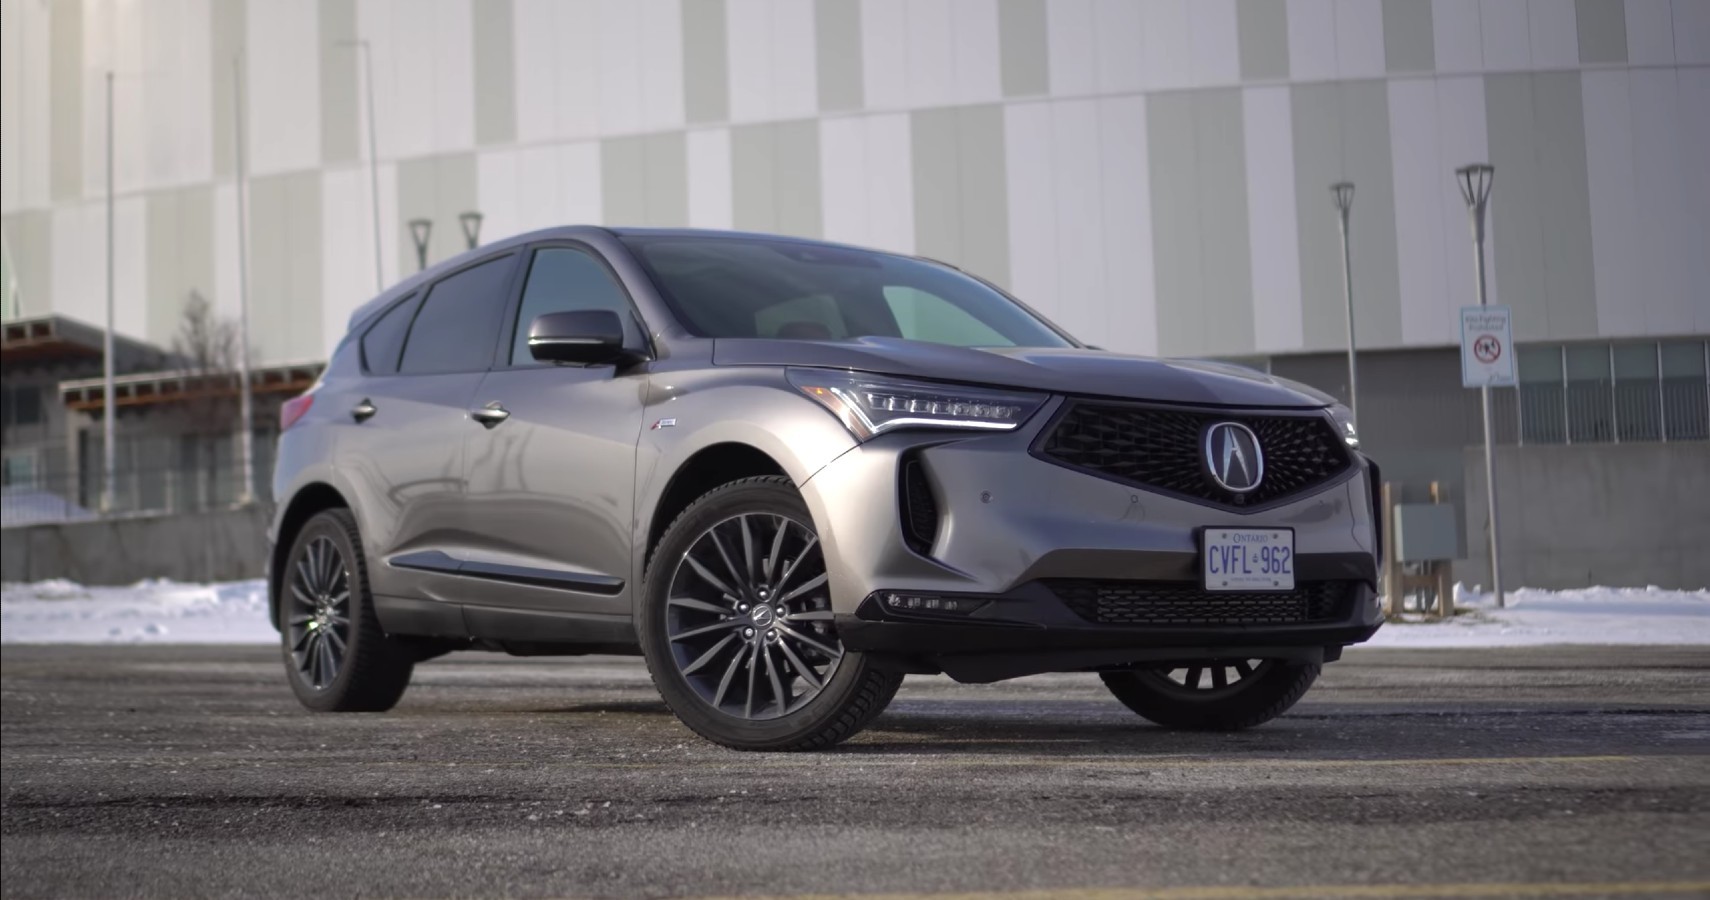 2022 Acura RDX Goes Under the Knife, Gets New Face and More Tech